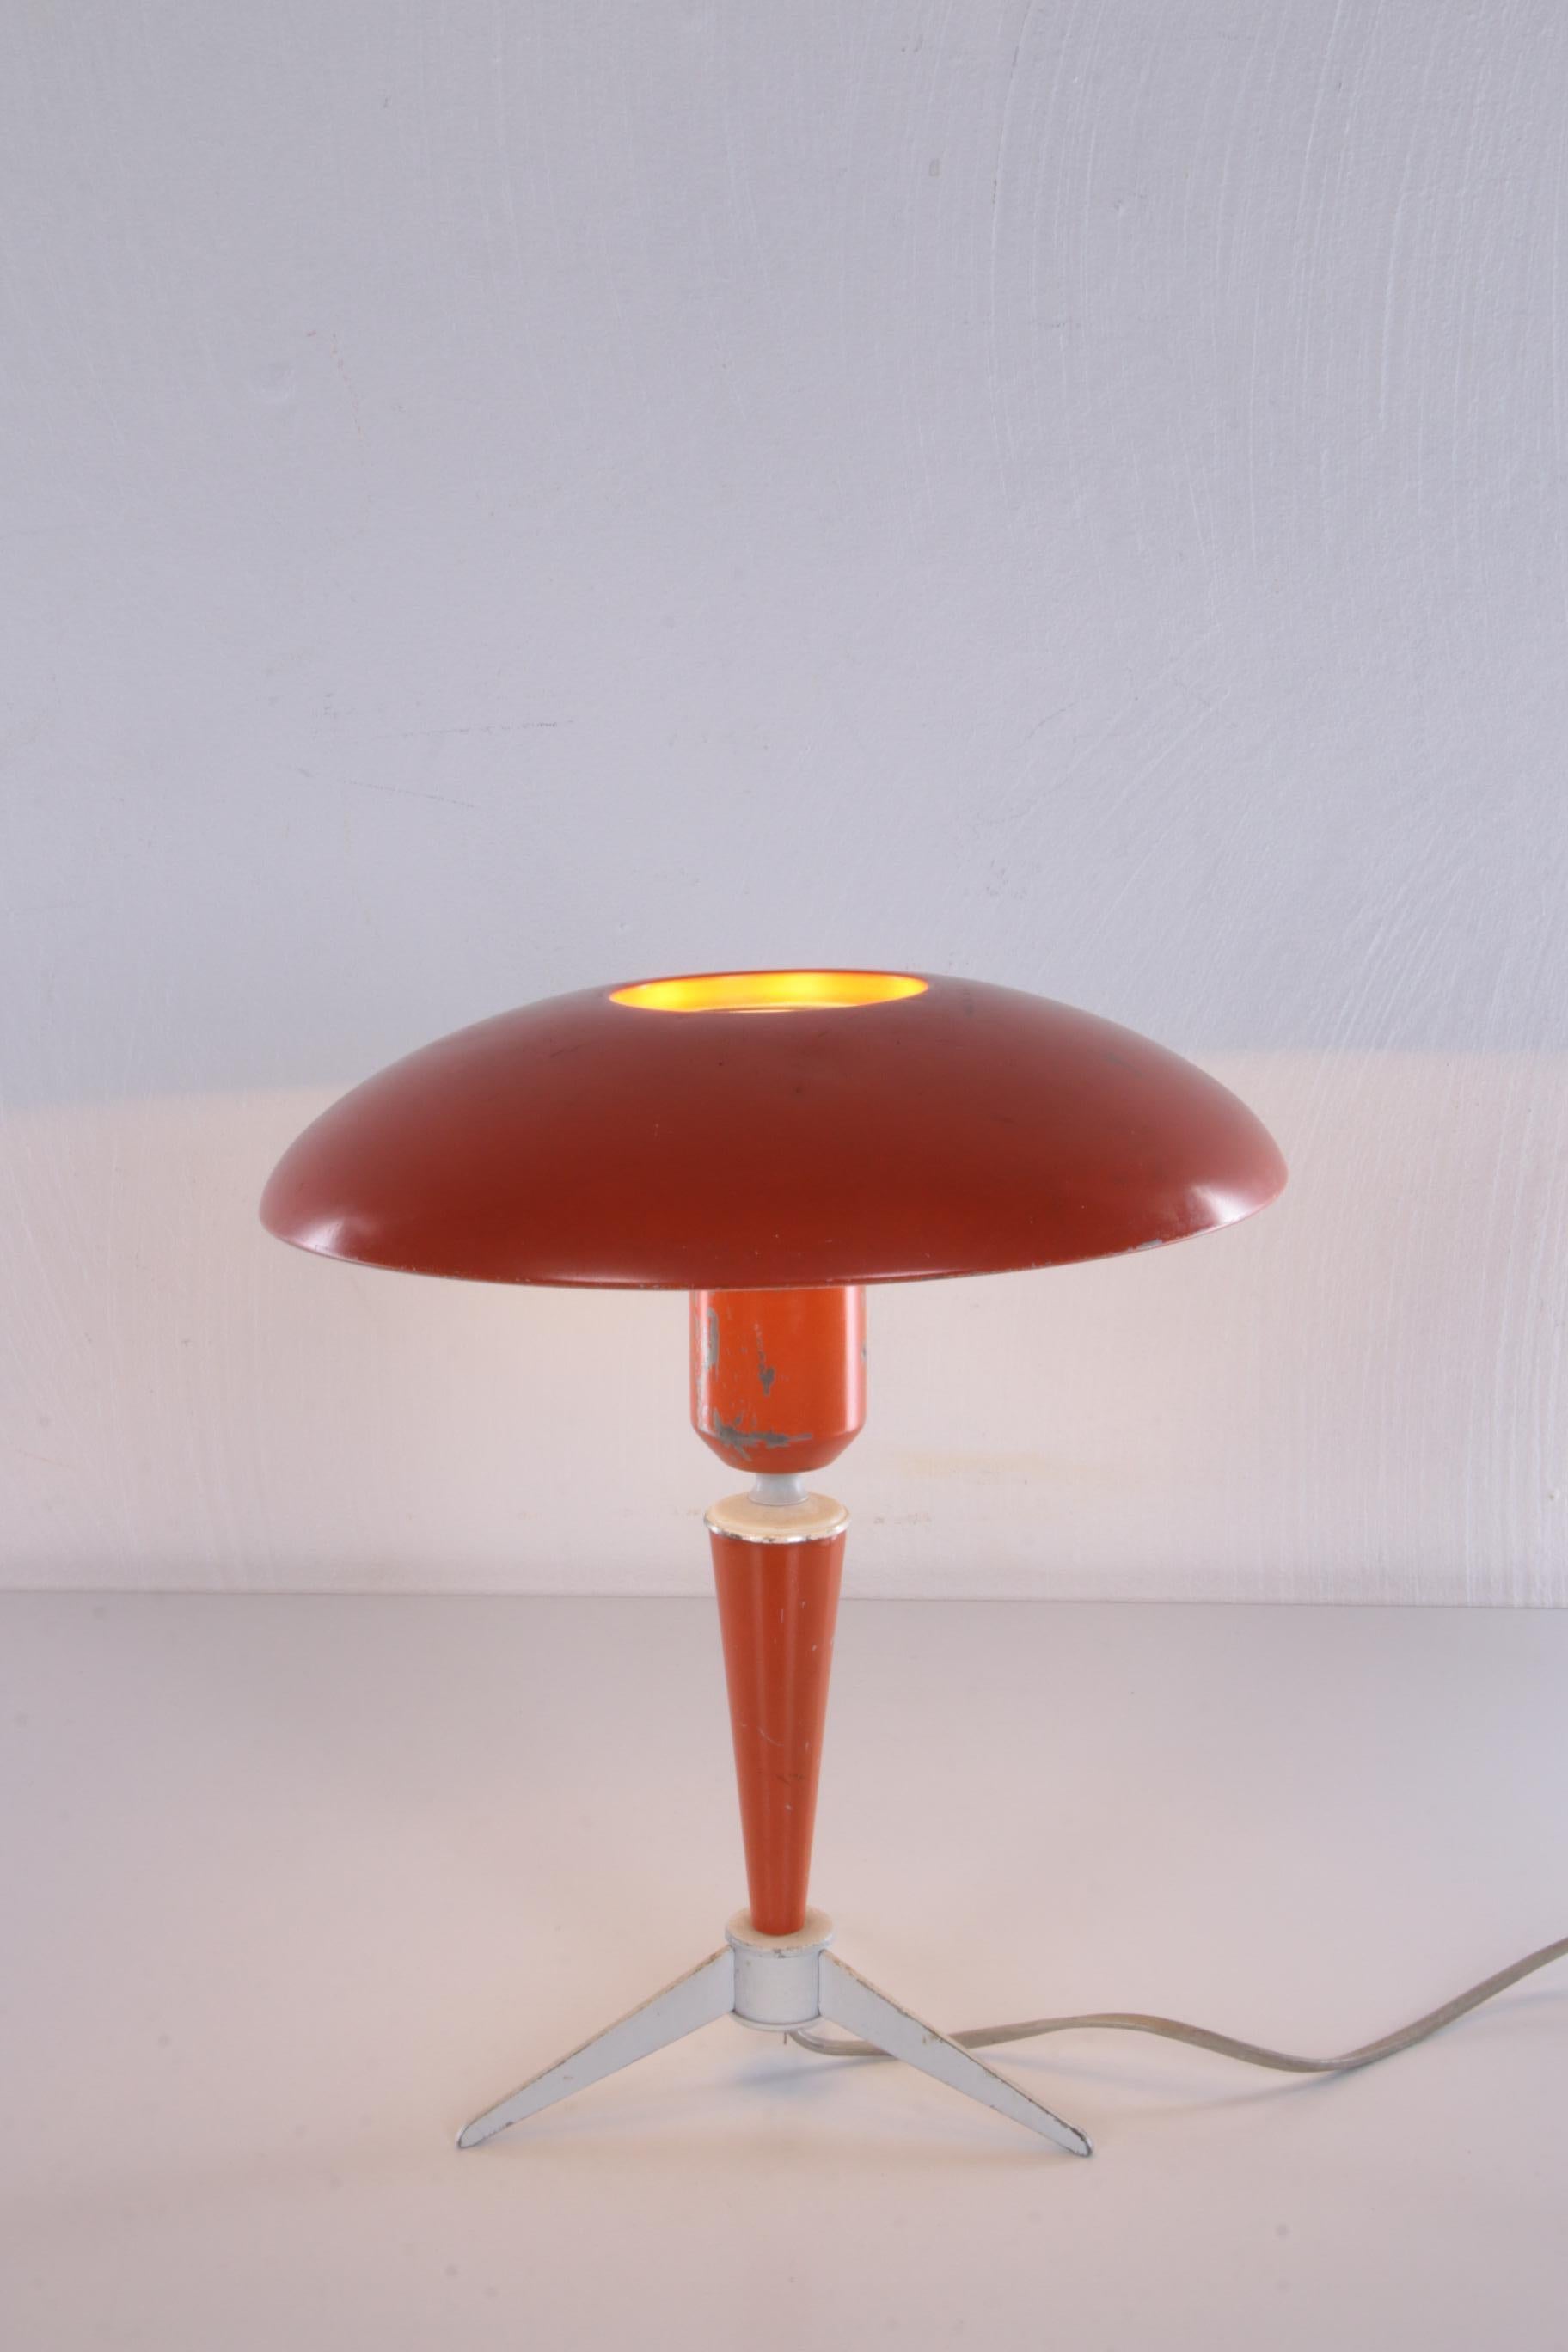 Dutch Tripod Table Lamp “Bijou” by Louis Kalff for Philips, 1950s For Sale